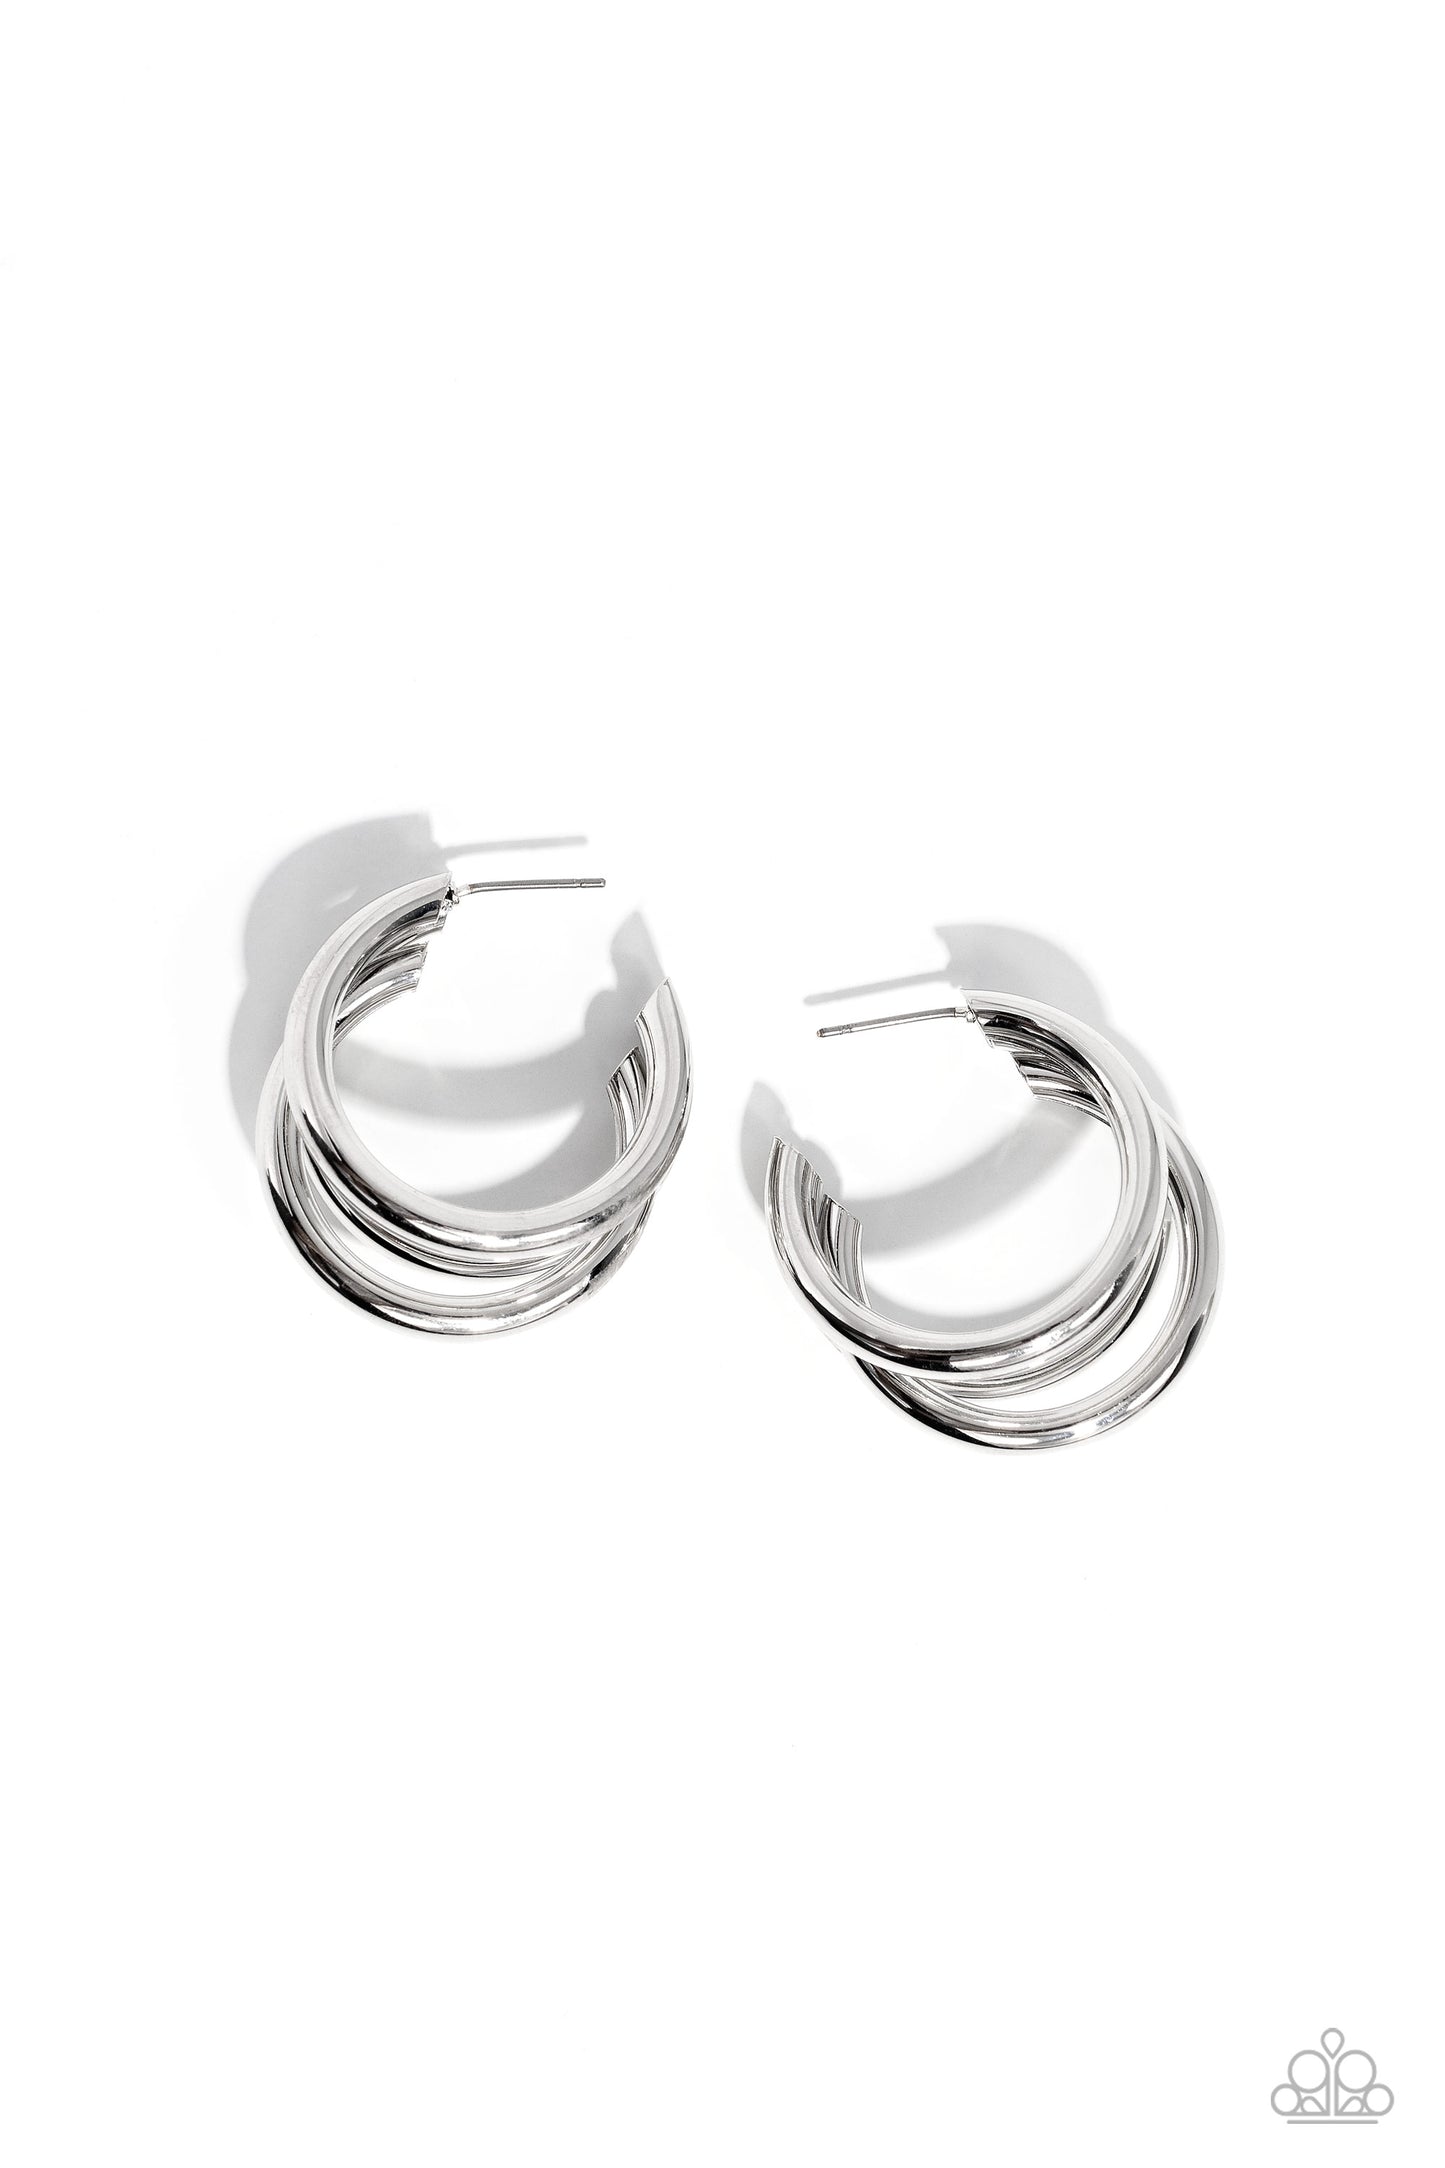 HOOP of the Day Silver Hoop Earring - Paparazzi Accessories  Three sleek silver bars delicately overlap into a bold hoop for a sleek, modern statement. Earring attaches to a standard post fitting. Hoop measures approximately 1 1/4" in diameter.  Sold as one pair of hoop earrings.  P5HO-SVXX-369XX